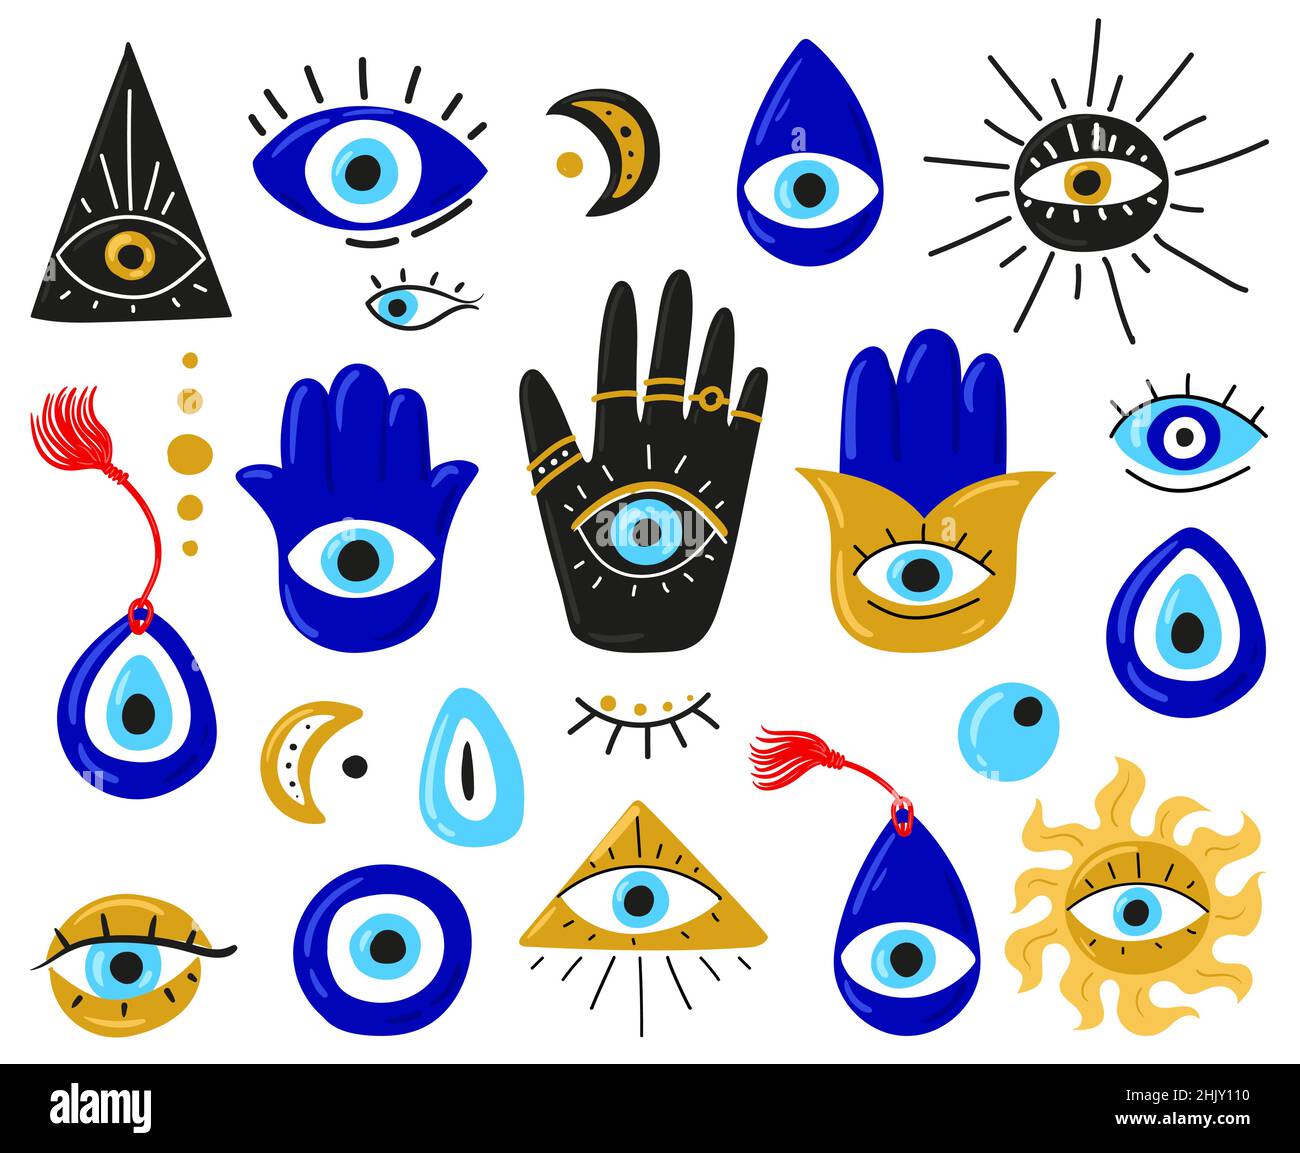 Evil eyes. Set of hand drawn different mascots. Evil eye, Hamsa, Hand of Fatima, Eye of Providence. Vector illustrations of amulets in blue. Freehand drawing style. Isolated on white Stock Vector